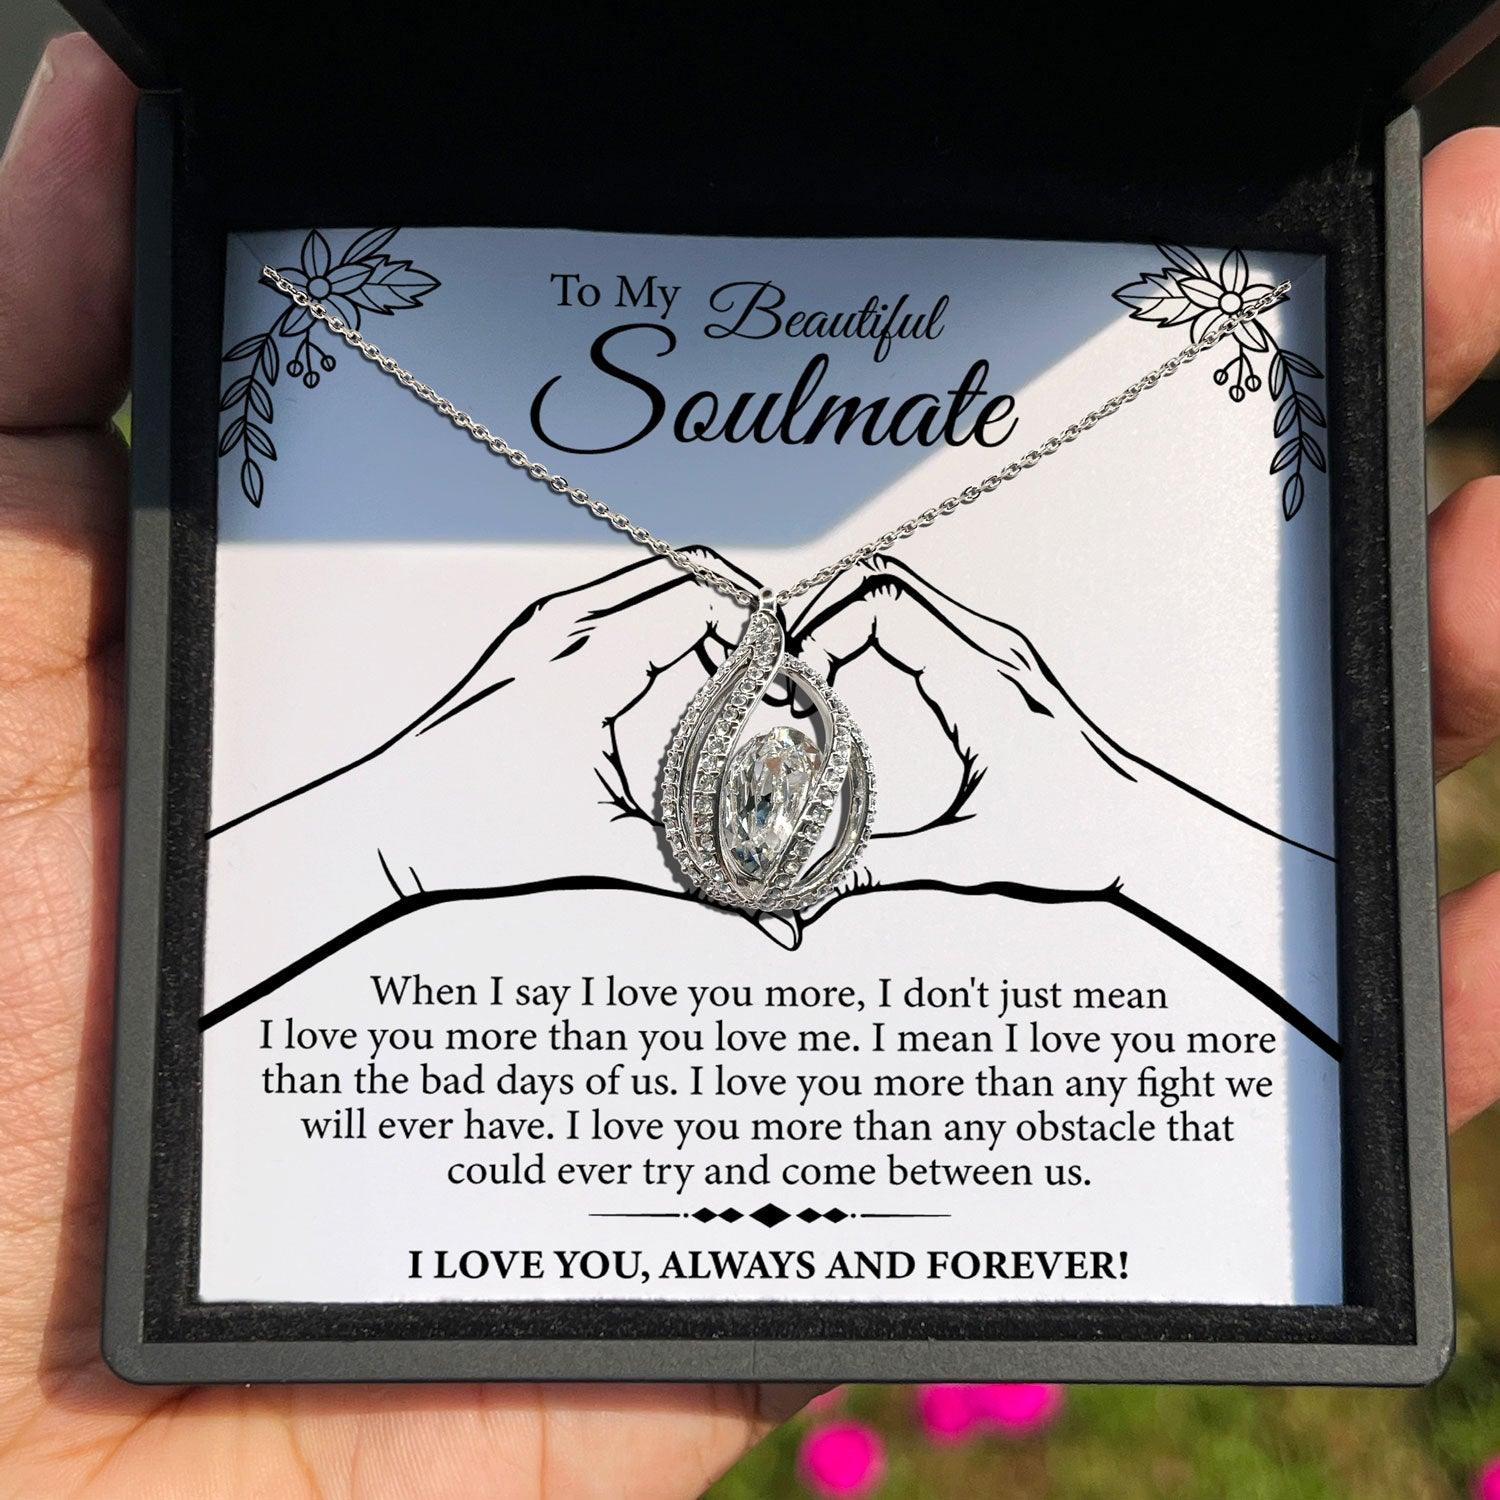 To My Beautiful Soulmate - I Love You Than The Bad Days Of Us - Orbital Birdcage Necklace - TRYNDI